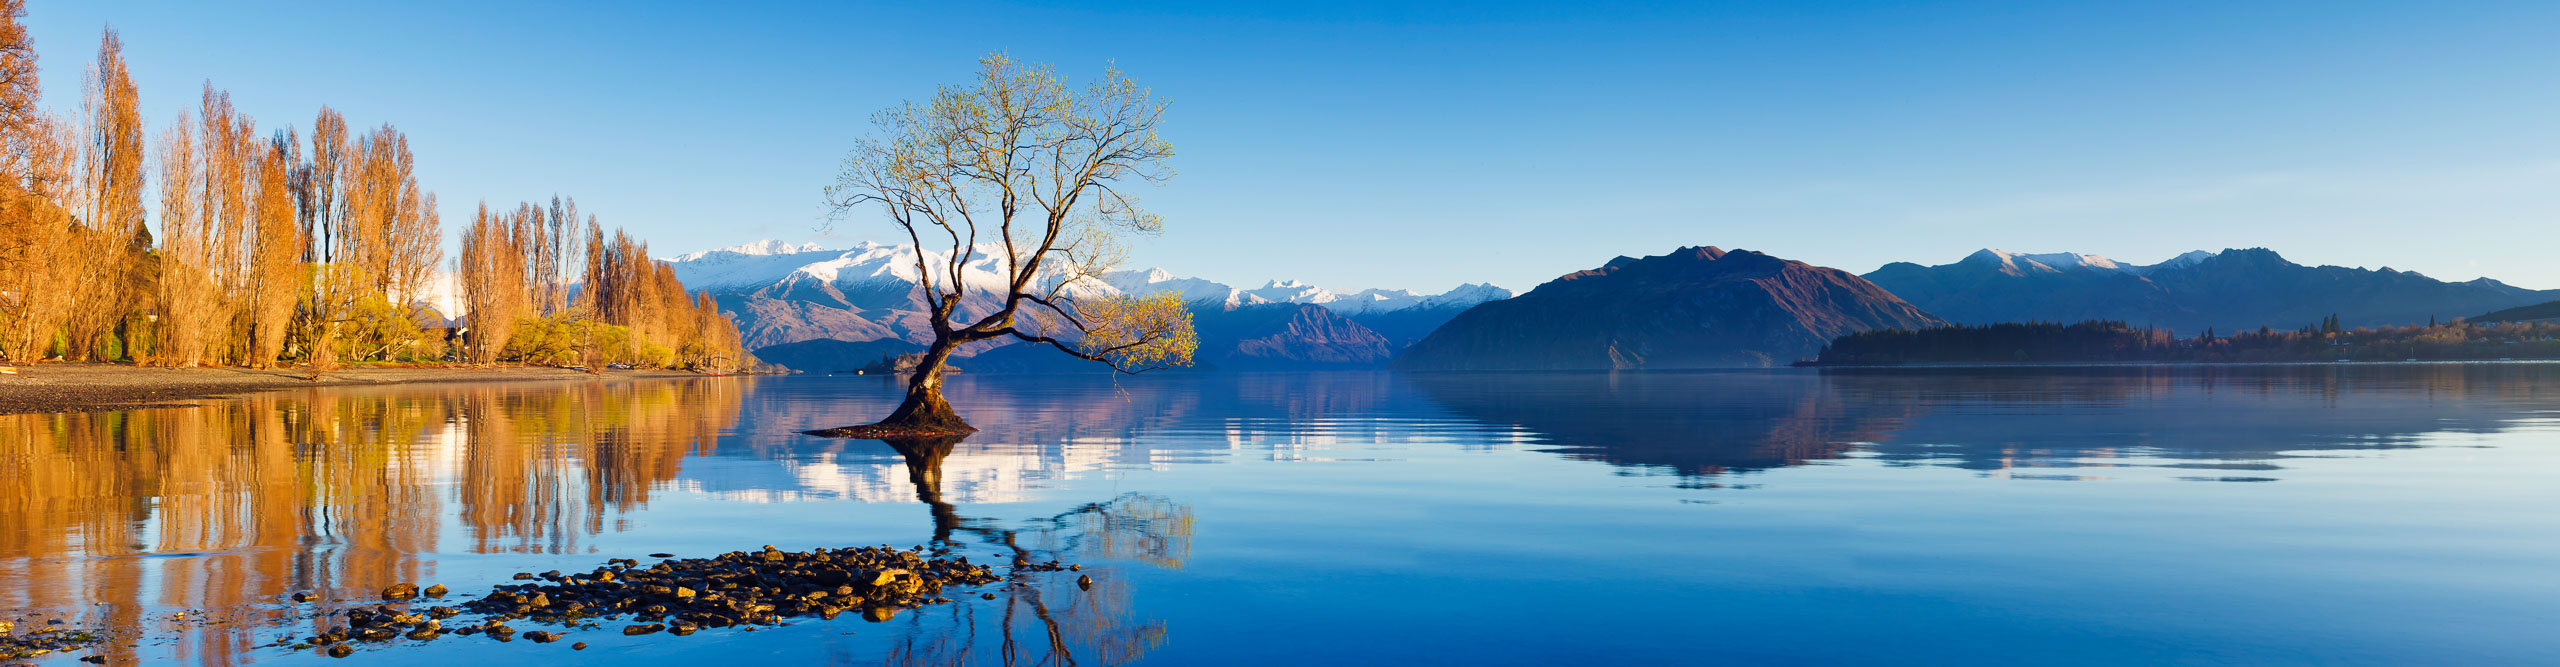 The famous Lone tree in the lake at Wanaka, South Island, New Zealand 